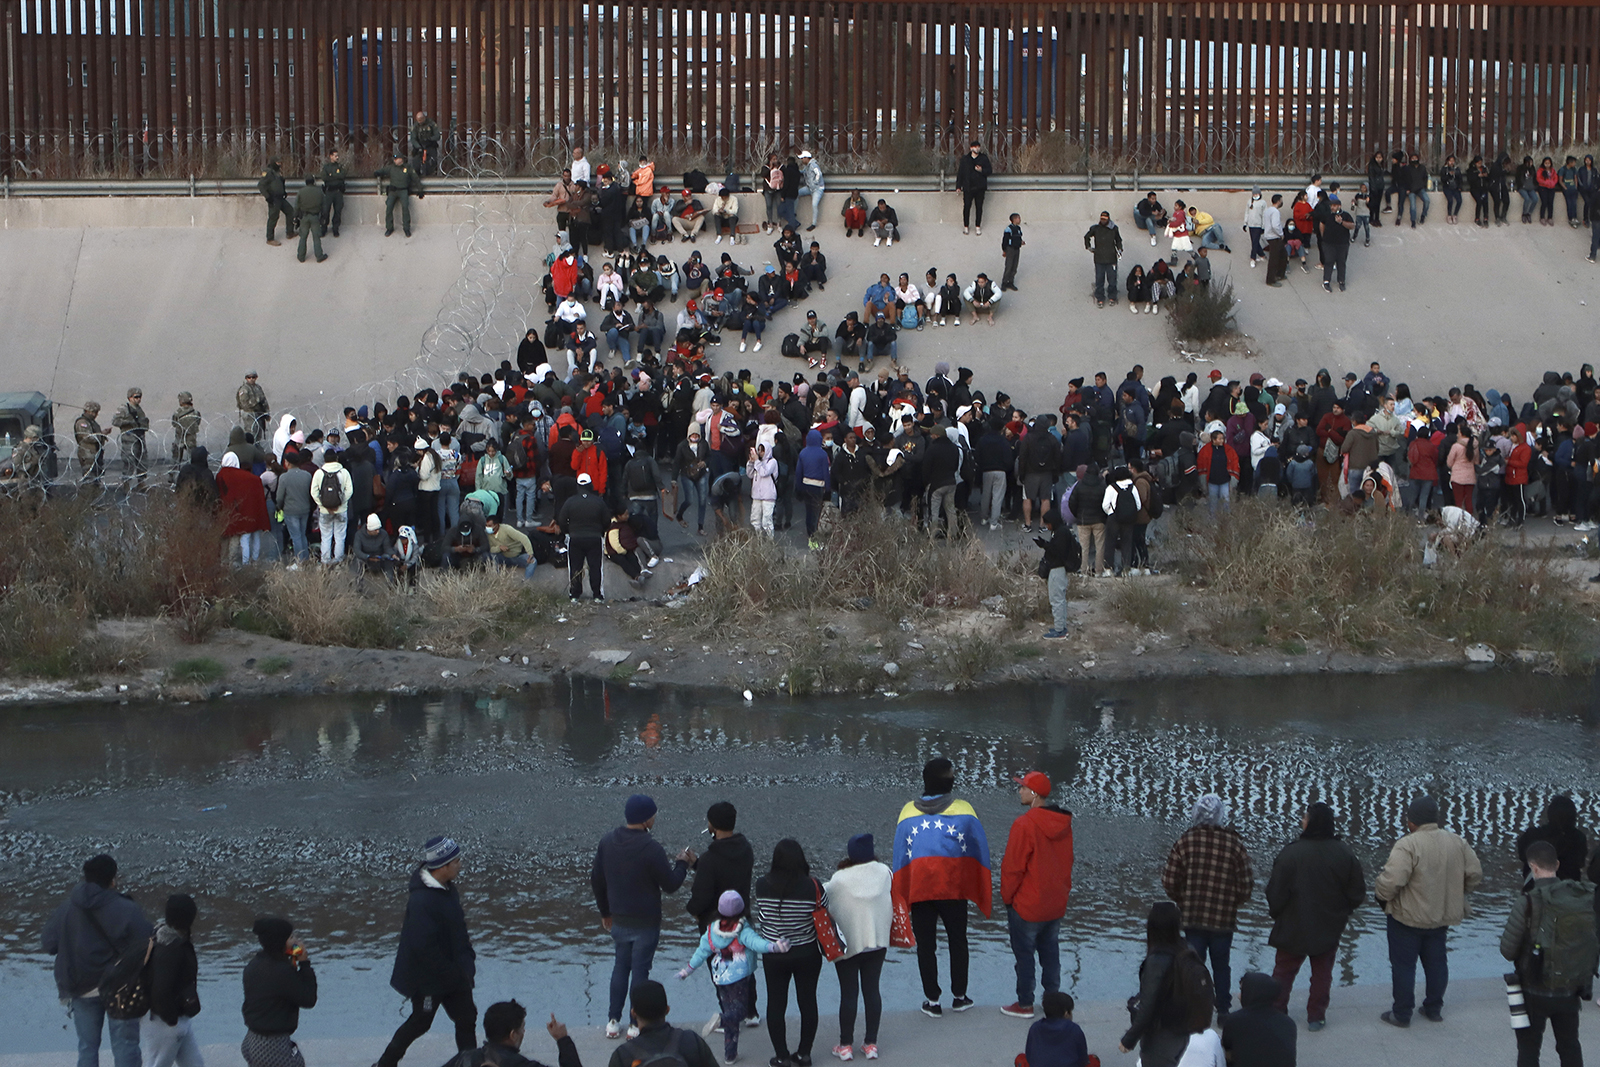 Migrants gather at a crossing into El Paso, Texas, as seen from Ciudad Juarez, Mexico, Dec. 20, 2022. Tensions remained high at the U.S-Mexico border Tuesday amid uncertainty over the future of restrictions on asylum-seekers, with the Biden administration asking the Supreme Court not to lift the limits before Christmas. (AP Photo/Christian Chavez)